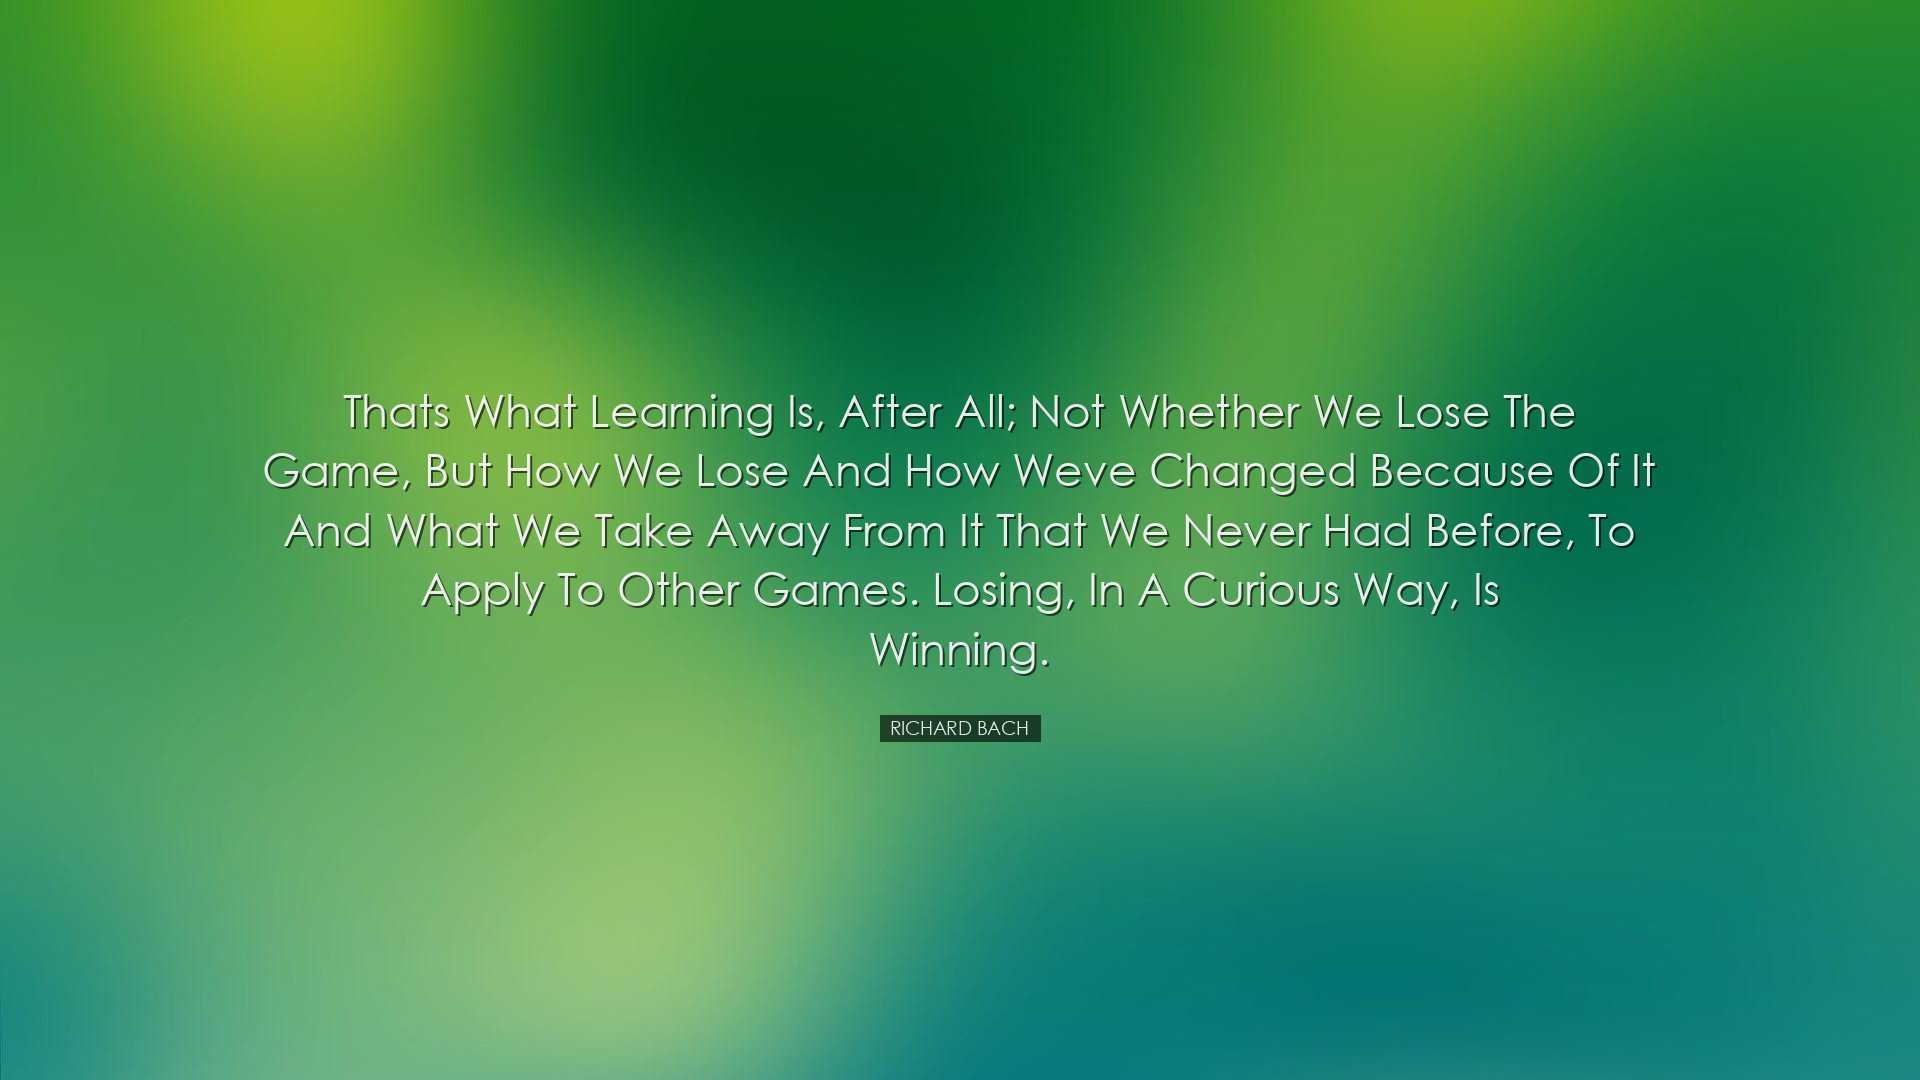 Thats what learning is, after all; not whether we lose the game, b